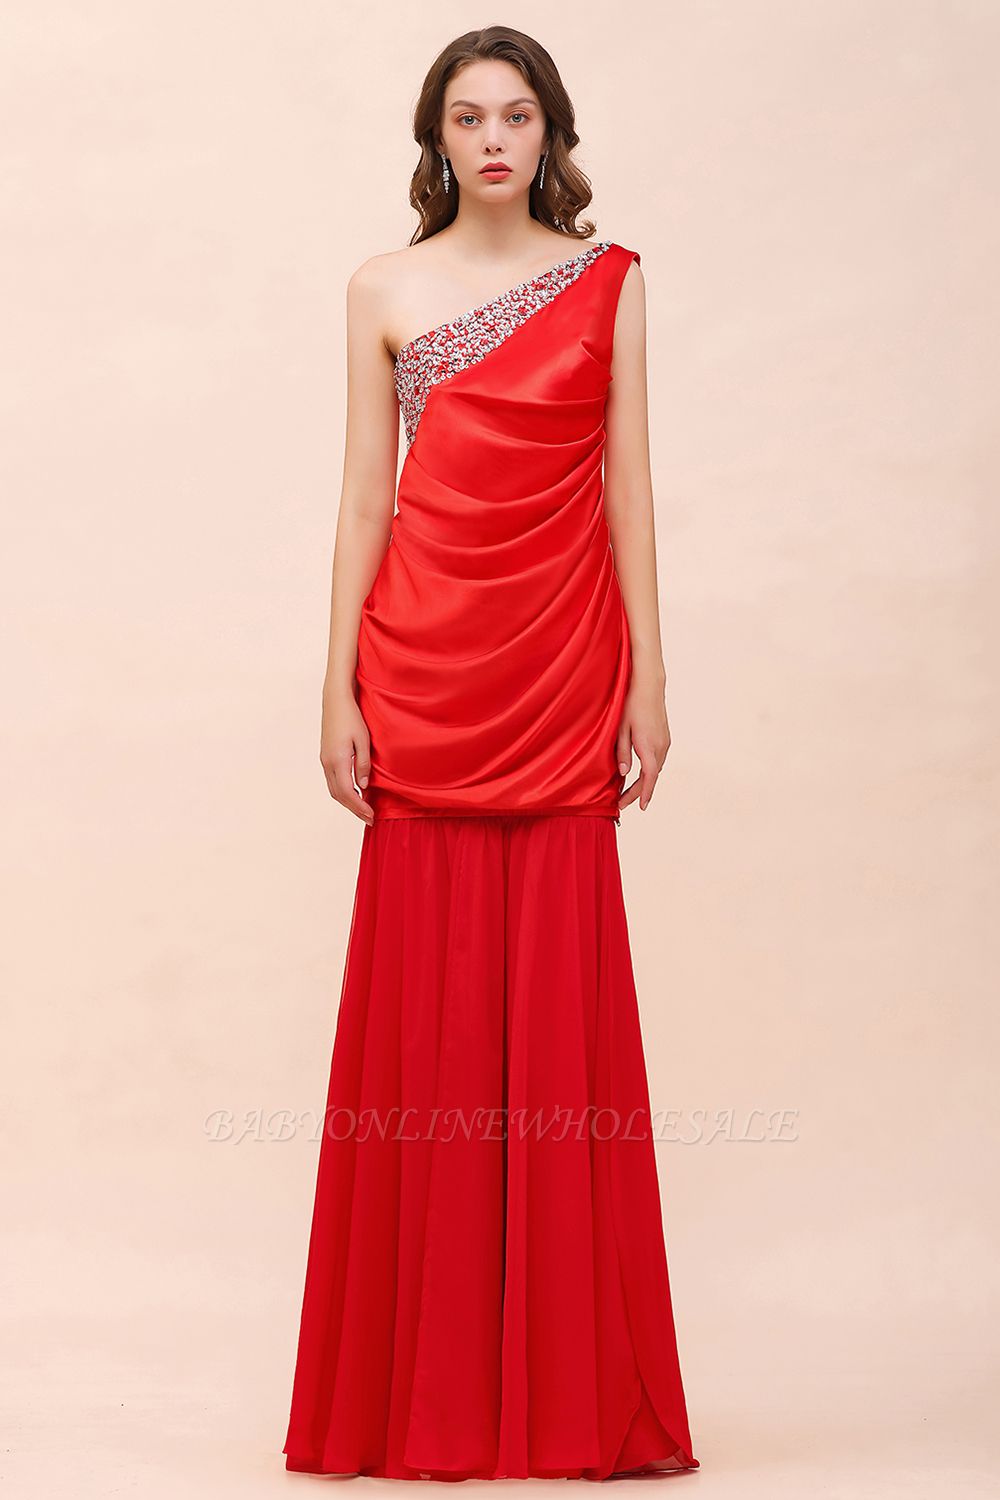 One Shoulder Red Ssatin Special Occasion Dress Detachable Dress for Party with Beadins